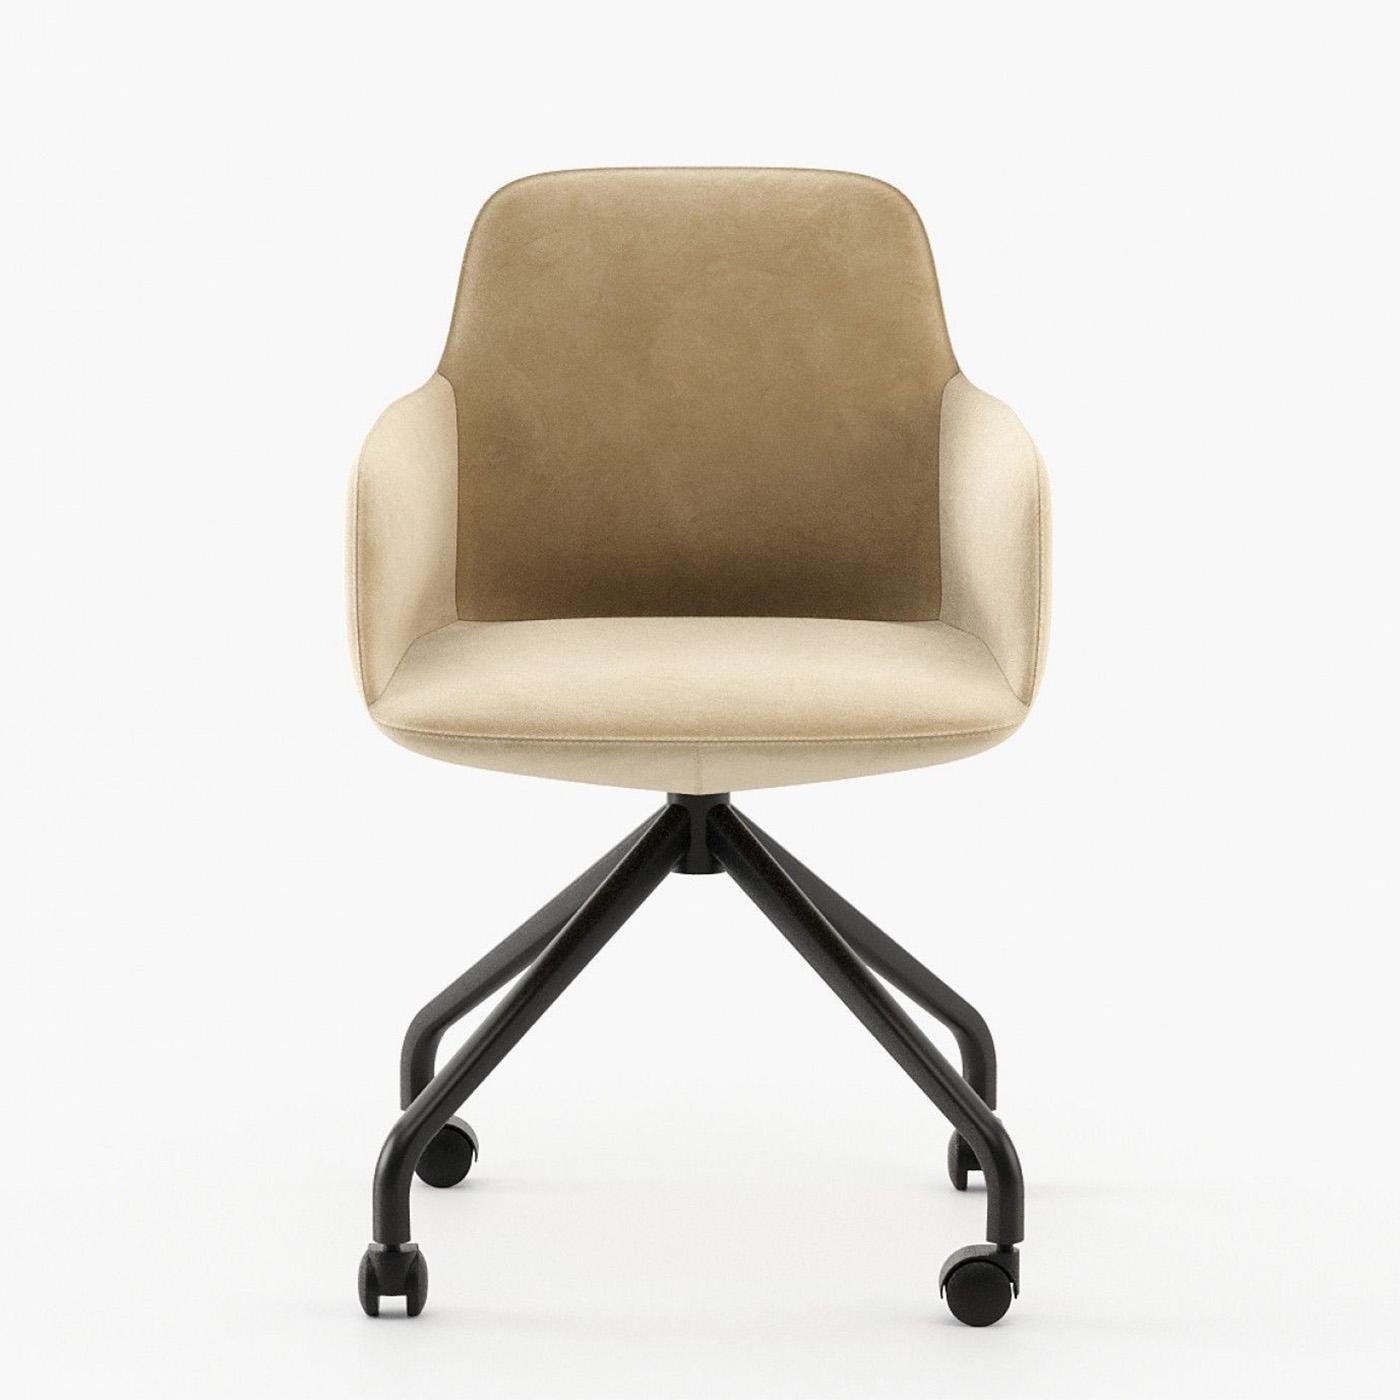 Armchair Hilton Office with seat with wooden structure
upholstered and covered with beige velvet fabric. With
swivel base in stainless steel in matte black finish, base
with rotative casters.
Also available on request with other fabric colors.